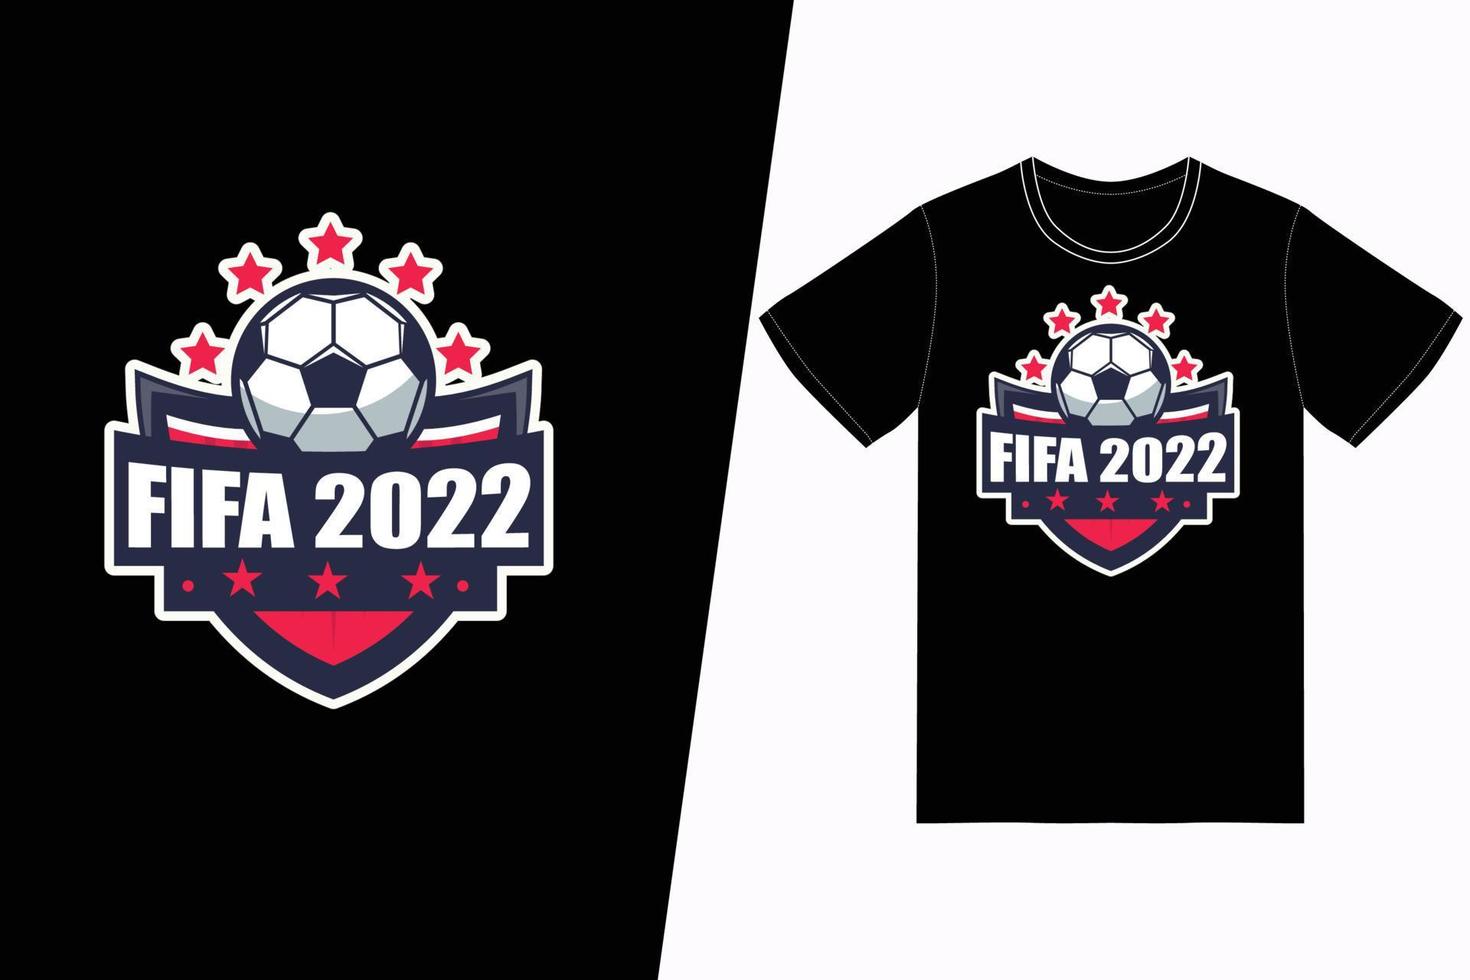 FIFA 2022 Fifa Soccer design. Fifa Soccer t-shirt design vector. For t-shirt print and other uses. vector